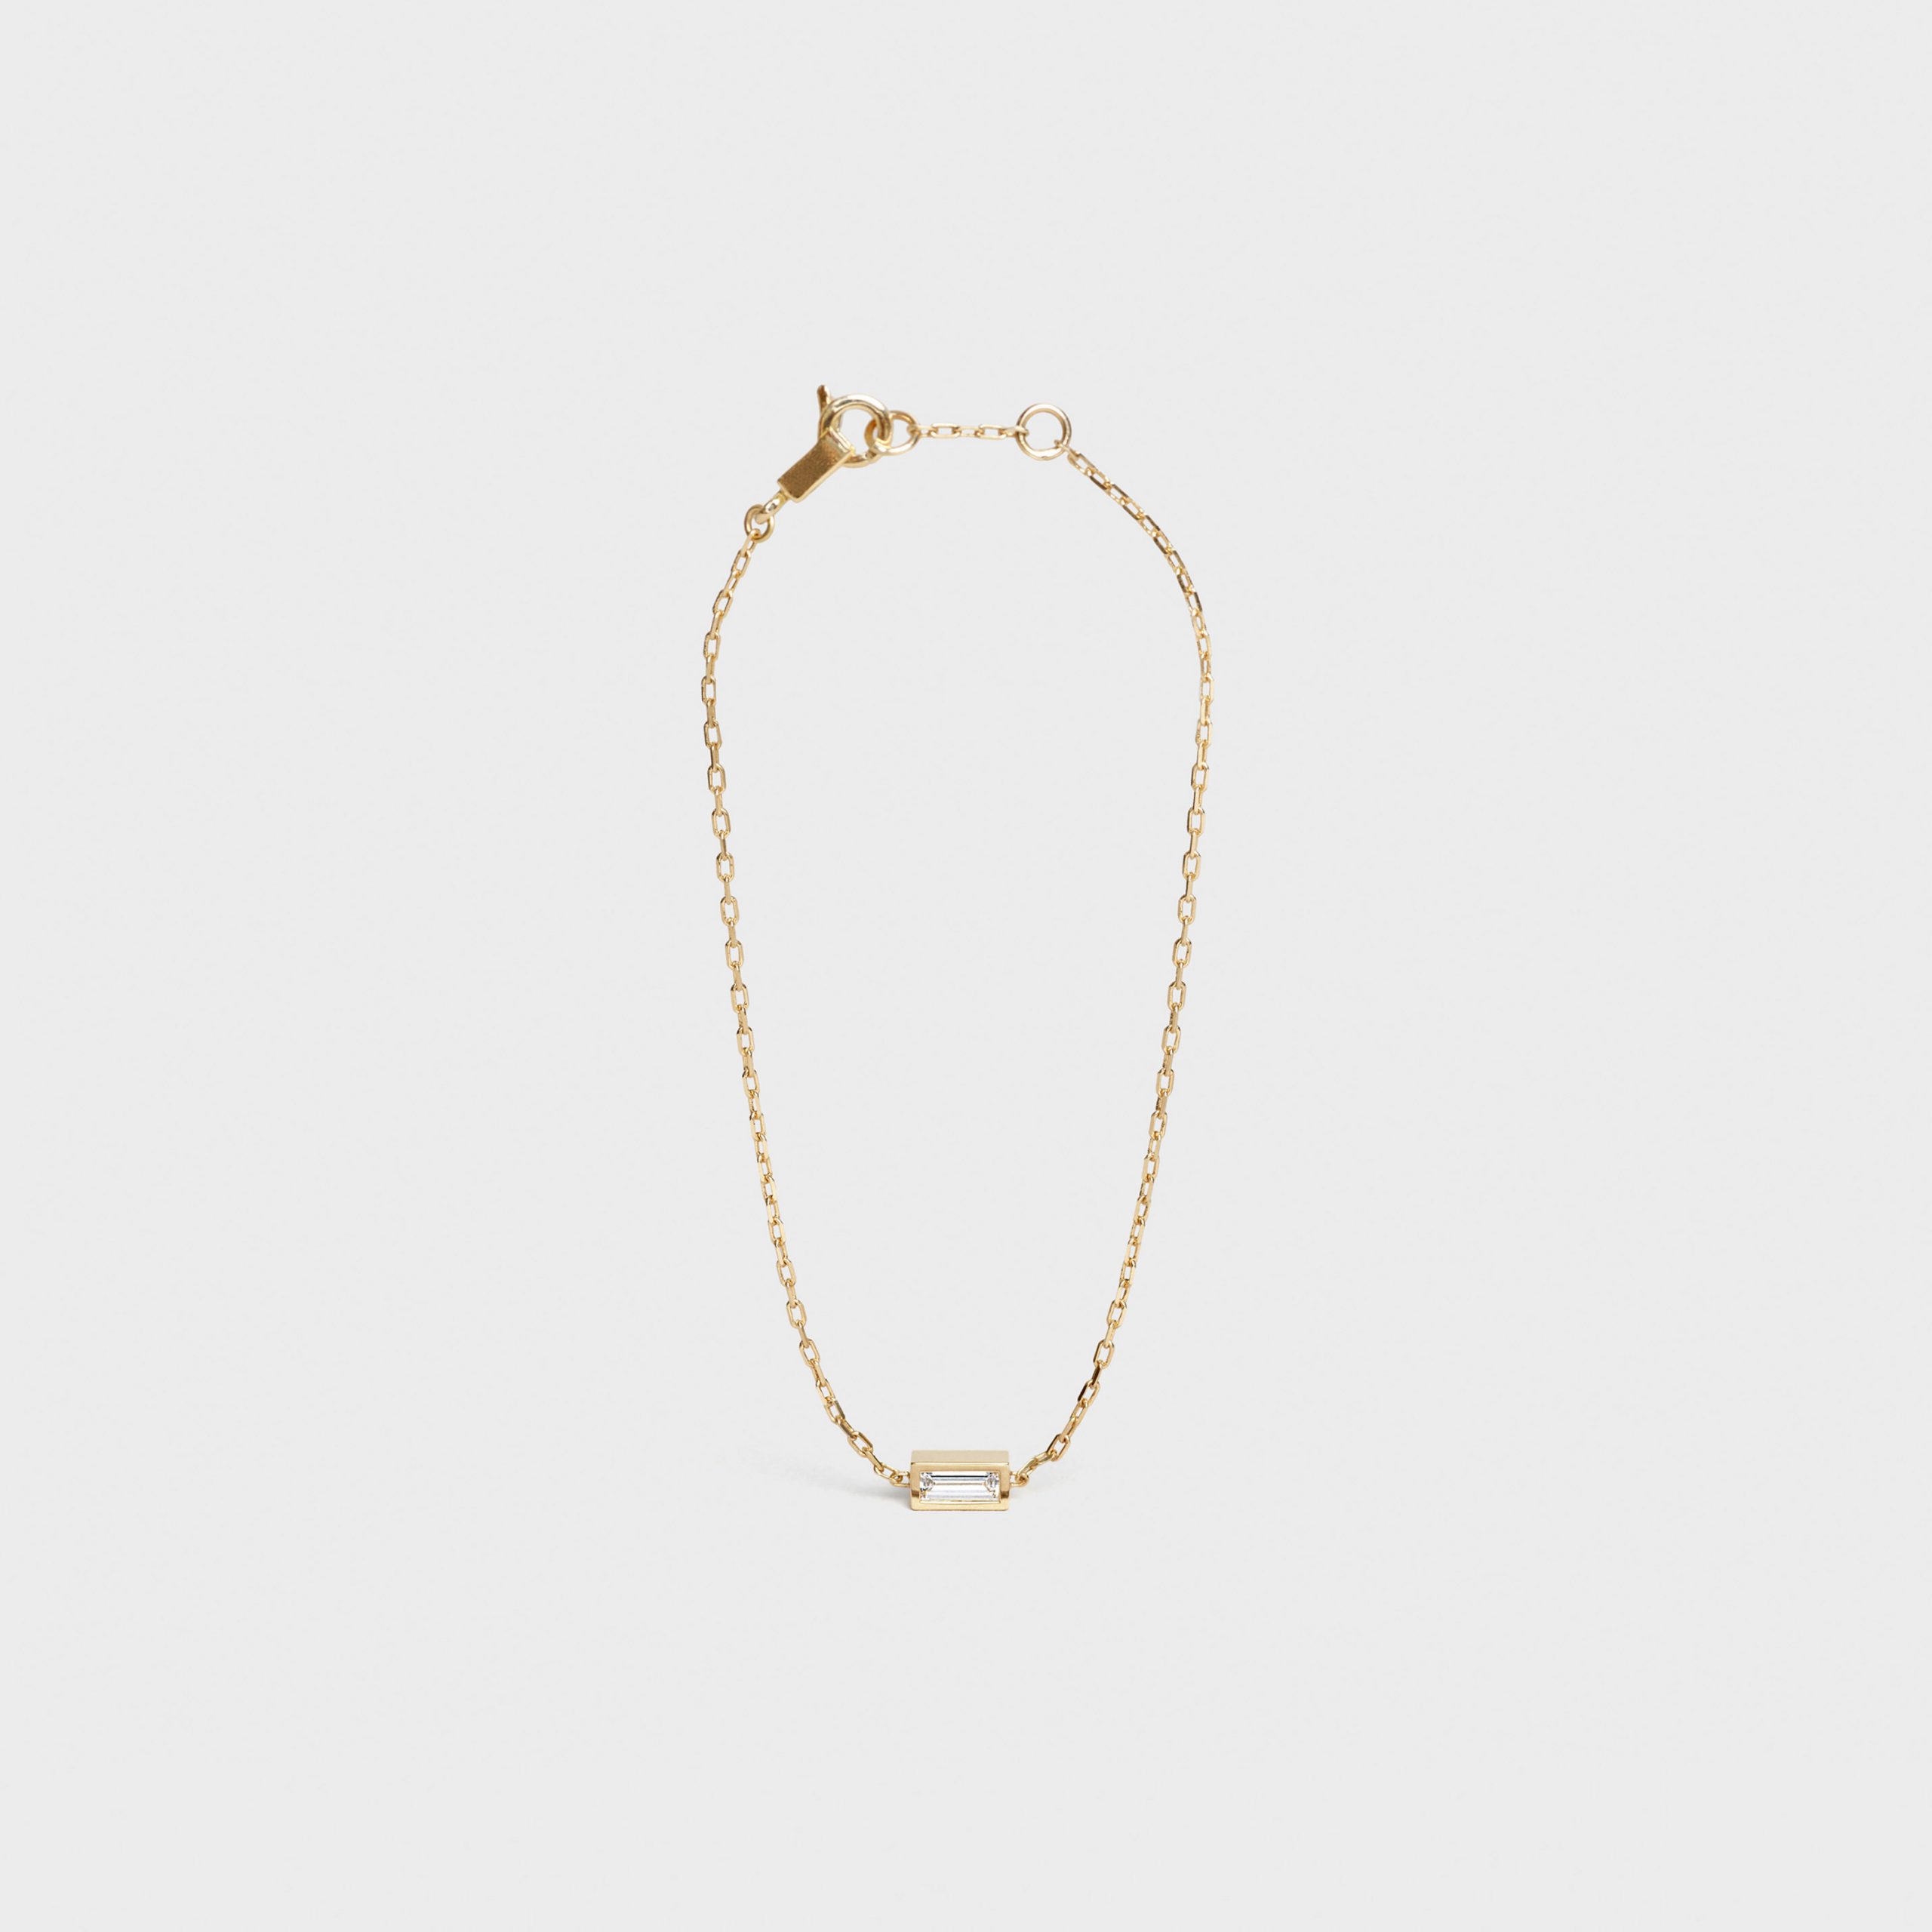 Celine Celine Sentimental Baguette Bracelet In Yellow Gold And Diamond – Yellow Gold And White – 46P046GYD.37YW